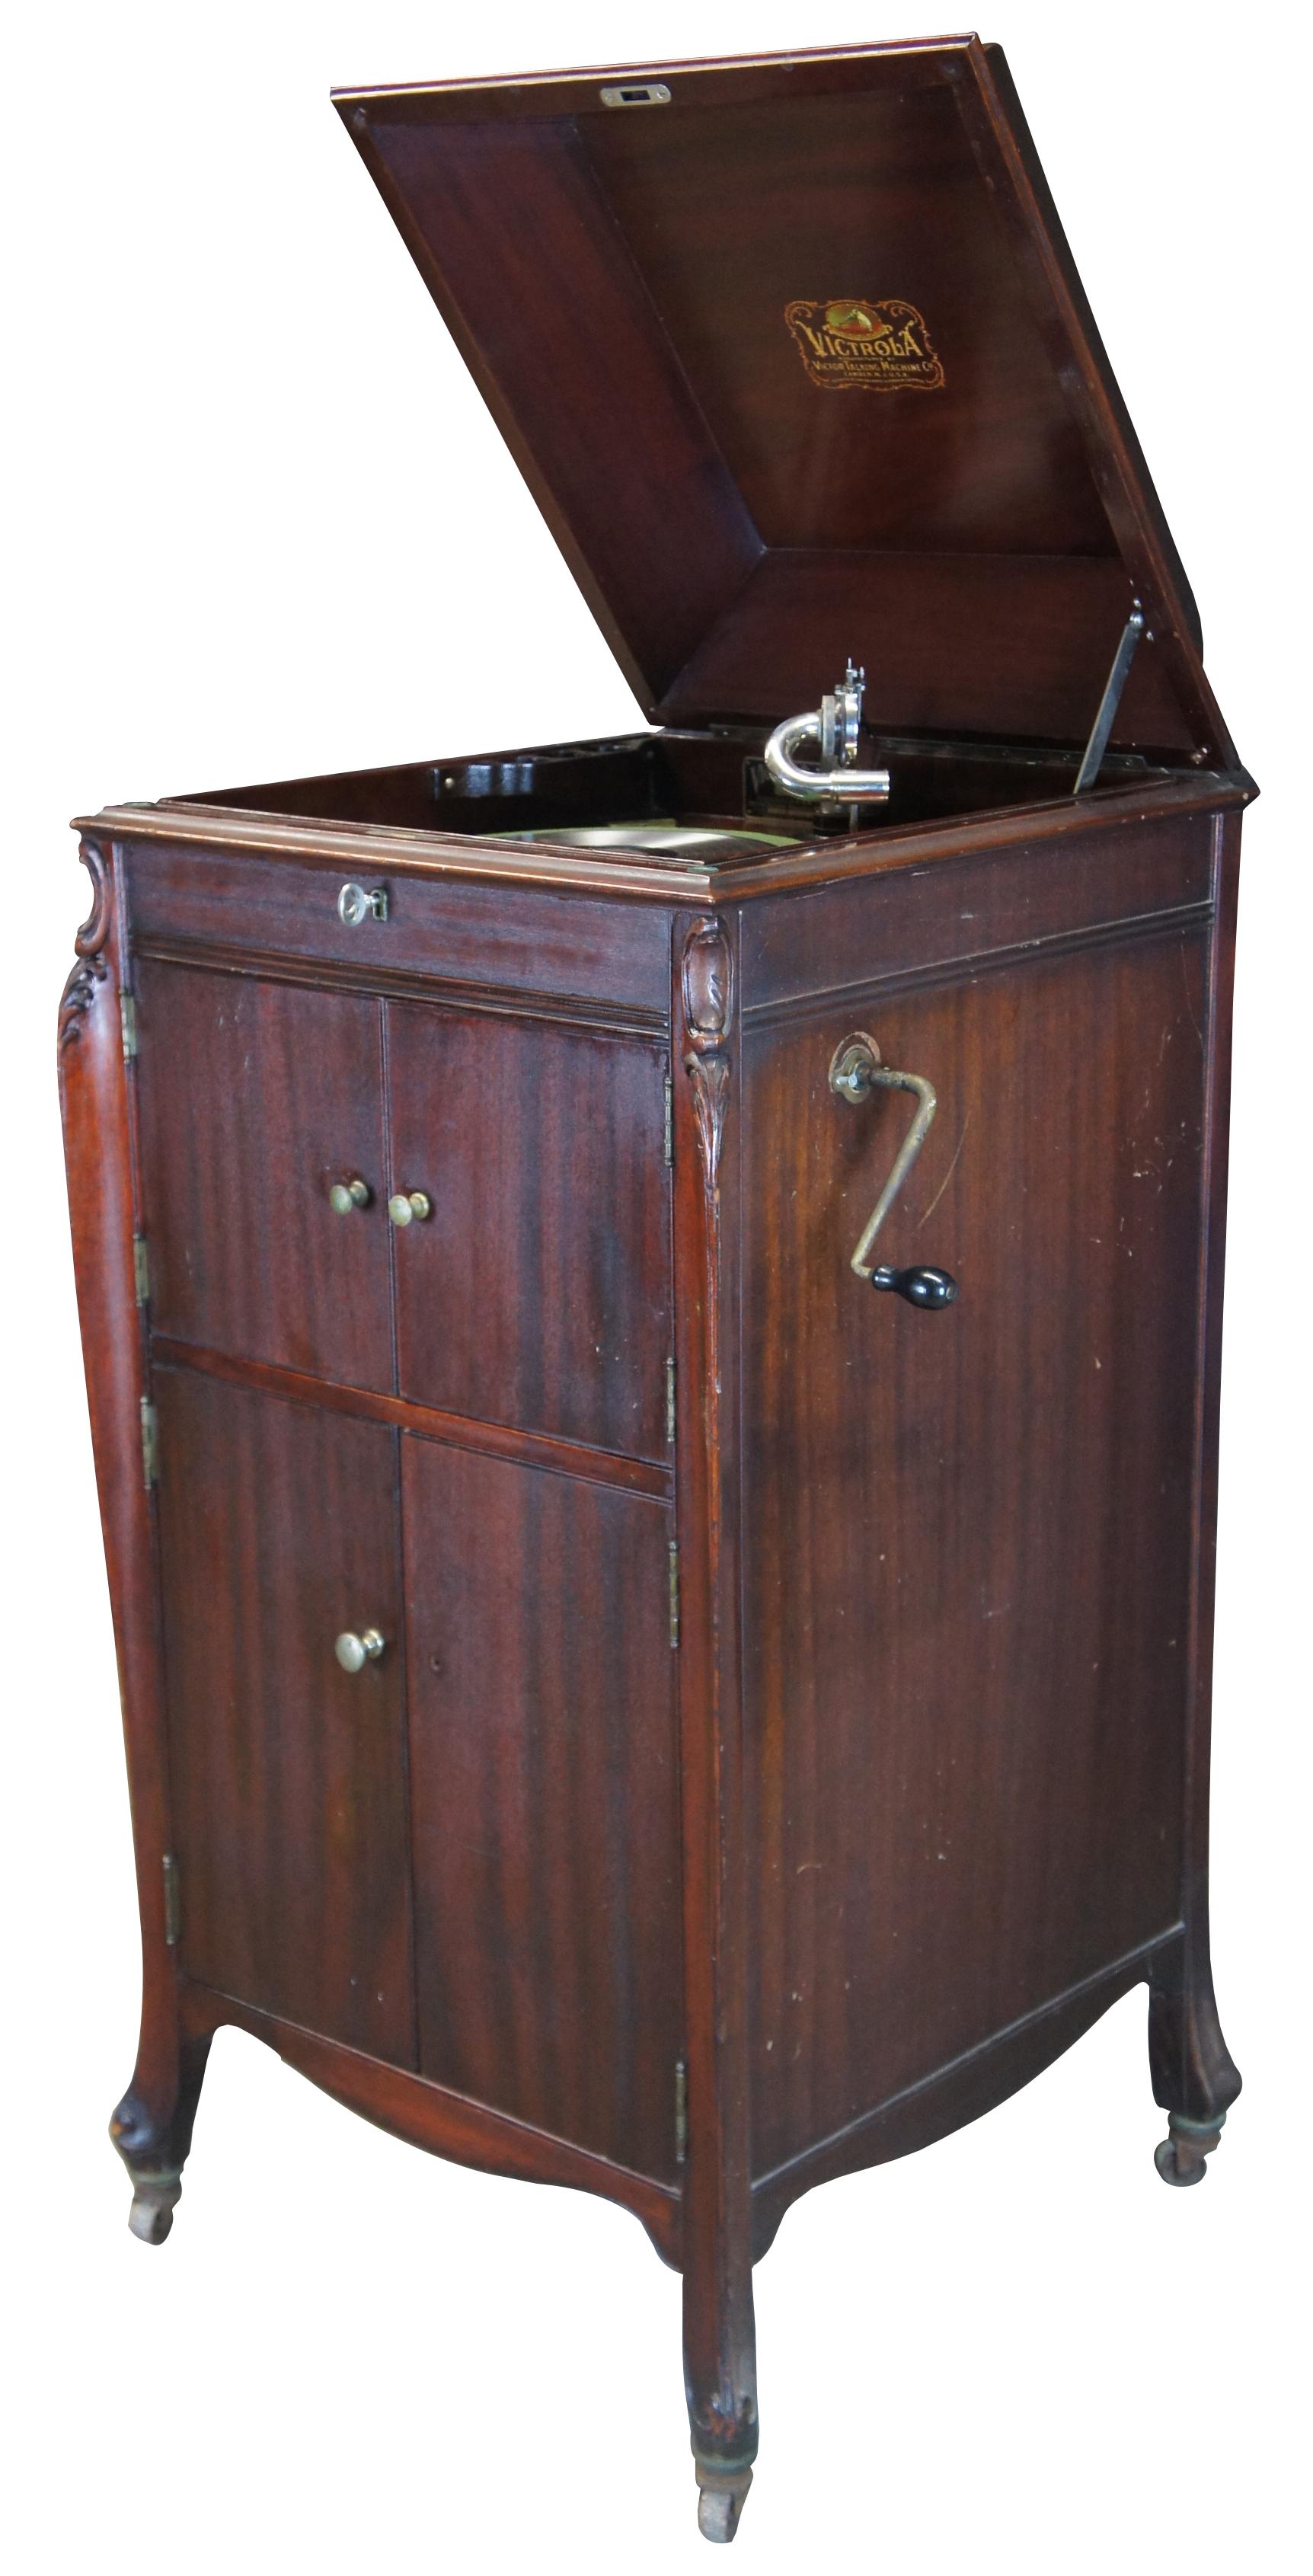 Victor Victrola talking machine VV-XIV, Iteration Two, circa 1913. 

The XIV was completely redesigned in early 1912, with a slightly smaller cabinet and far more proportioned appearance. Nickel plating was used in place of gold, the three-spring